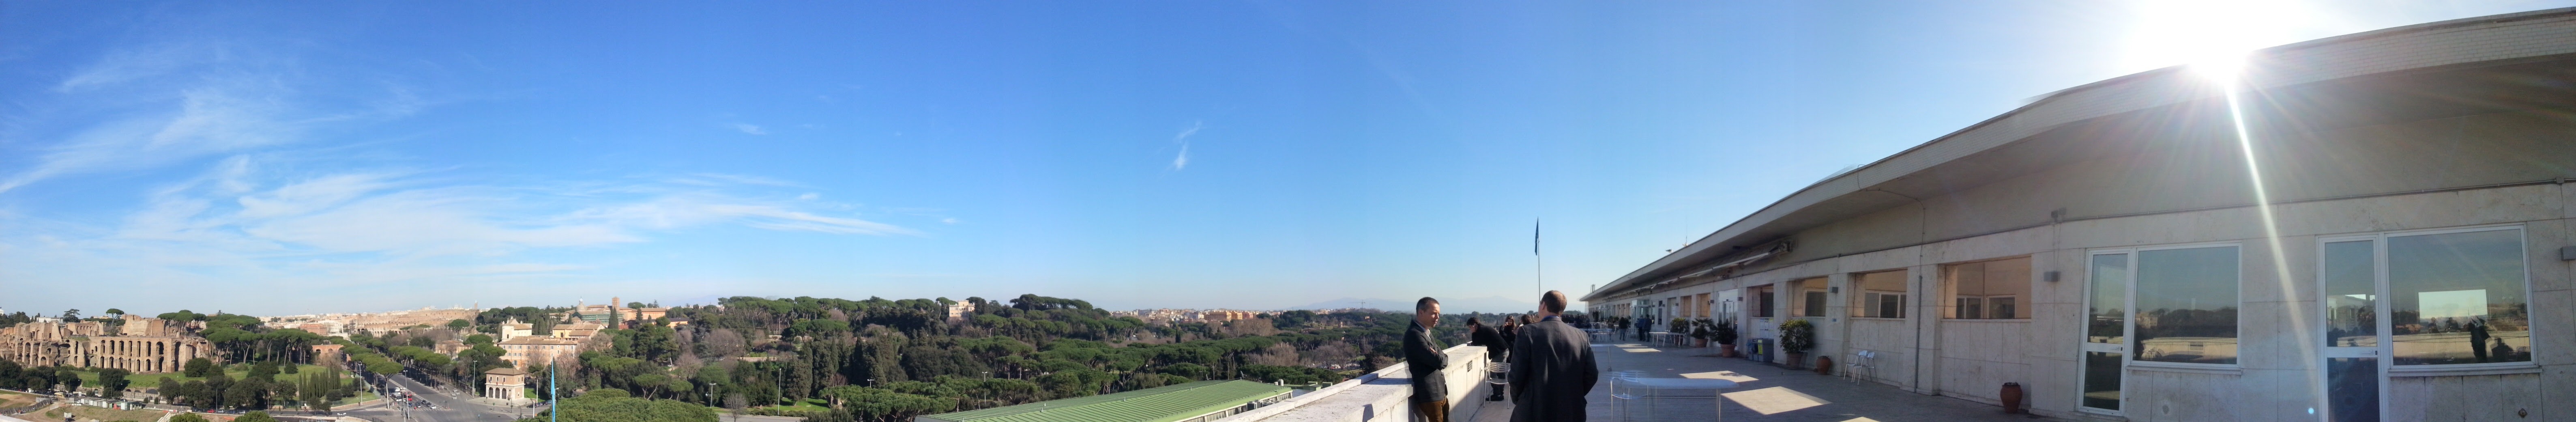 on location in Rome, Italy, FAO Headquarters